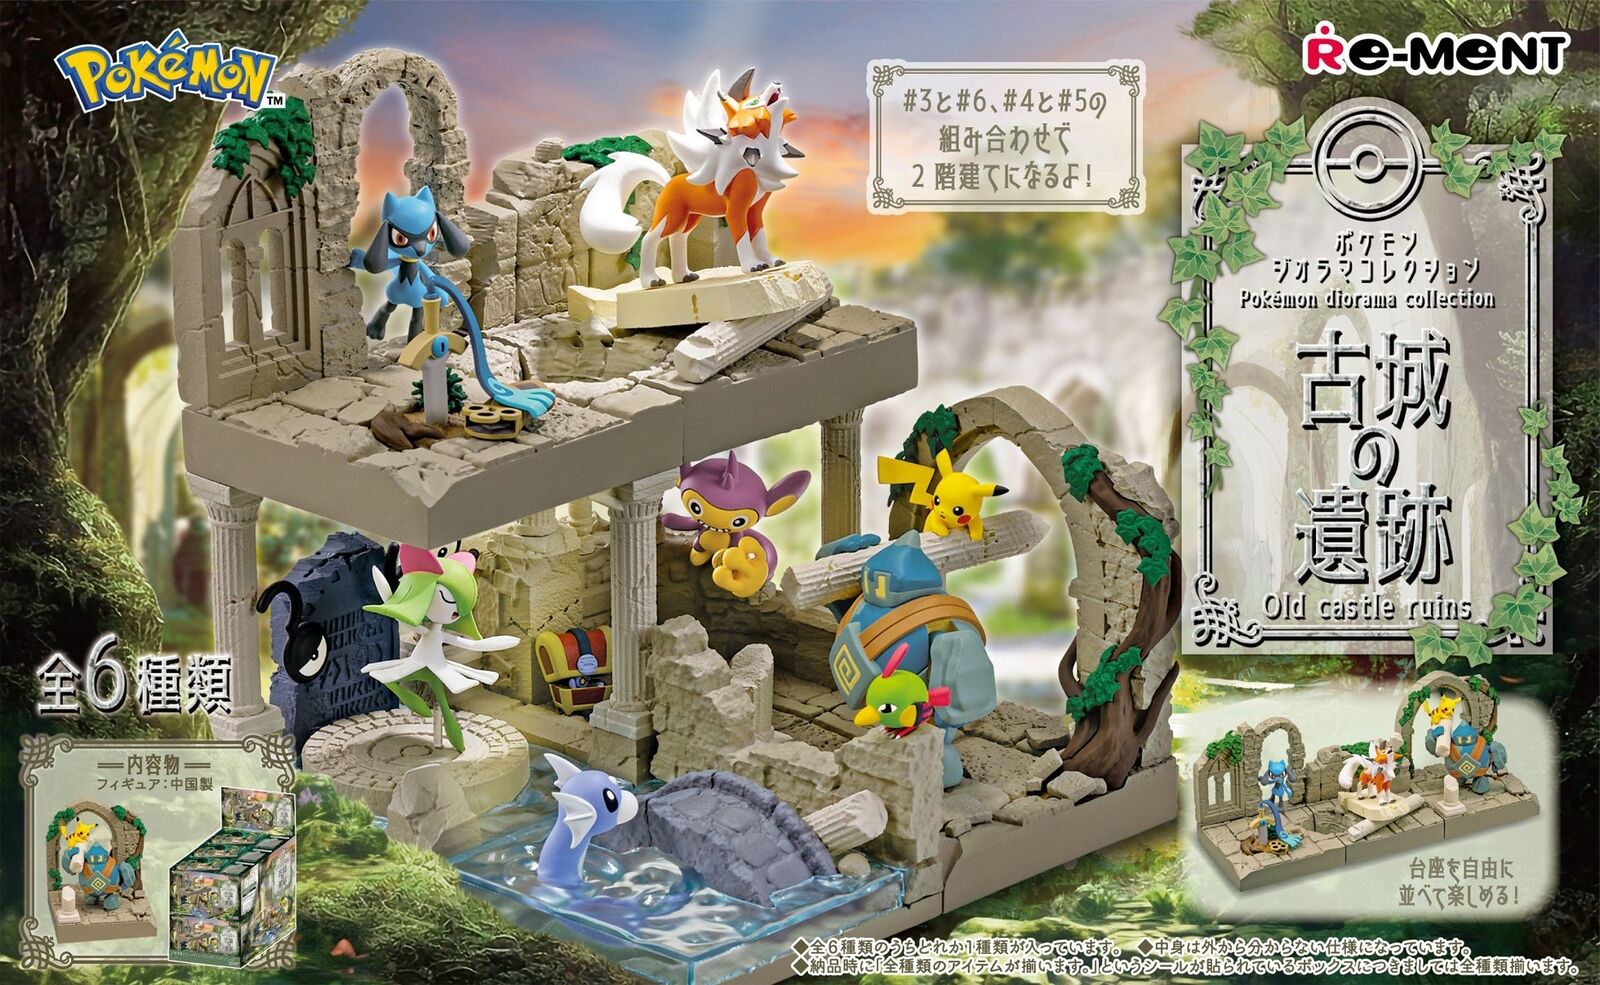 Pokemon: Diorama Collection Old Castle Ruins Blind Box